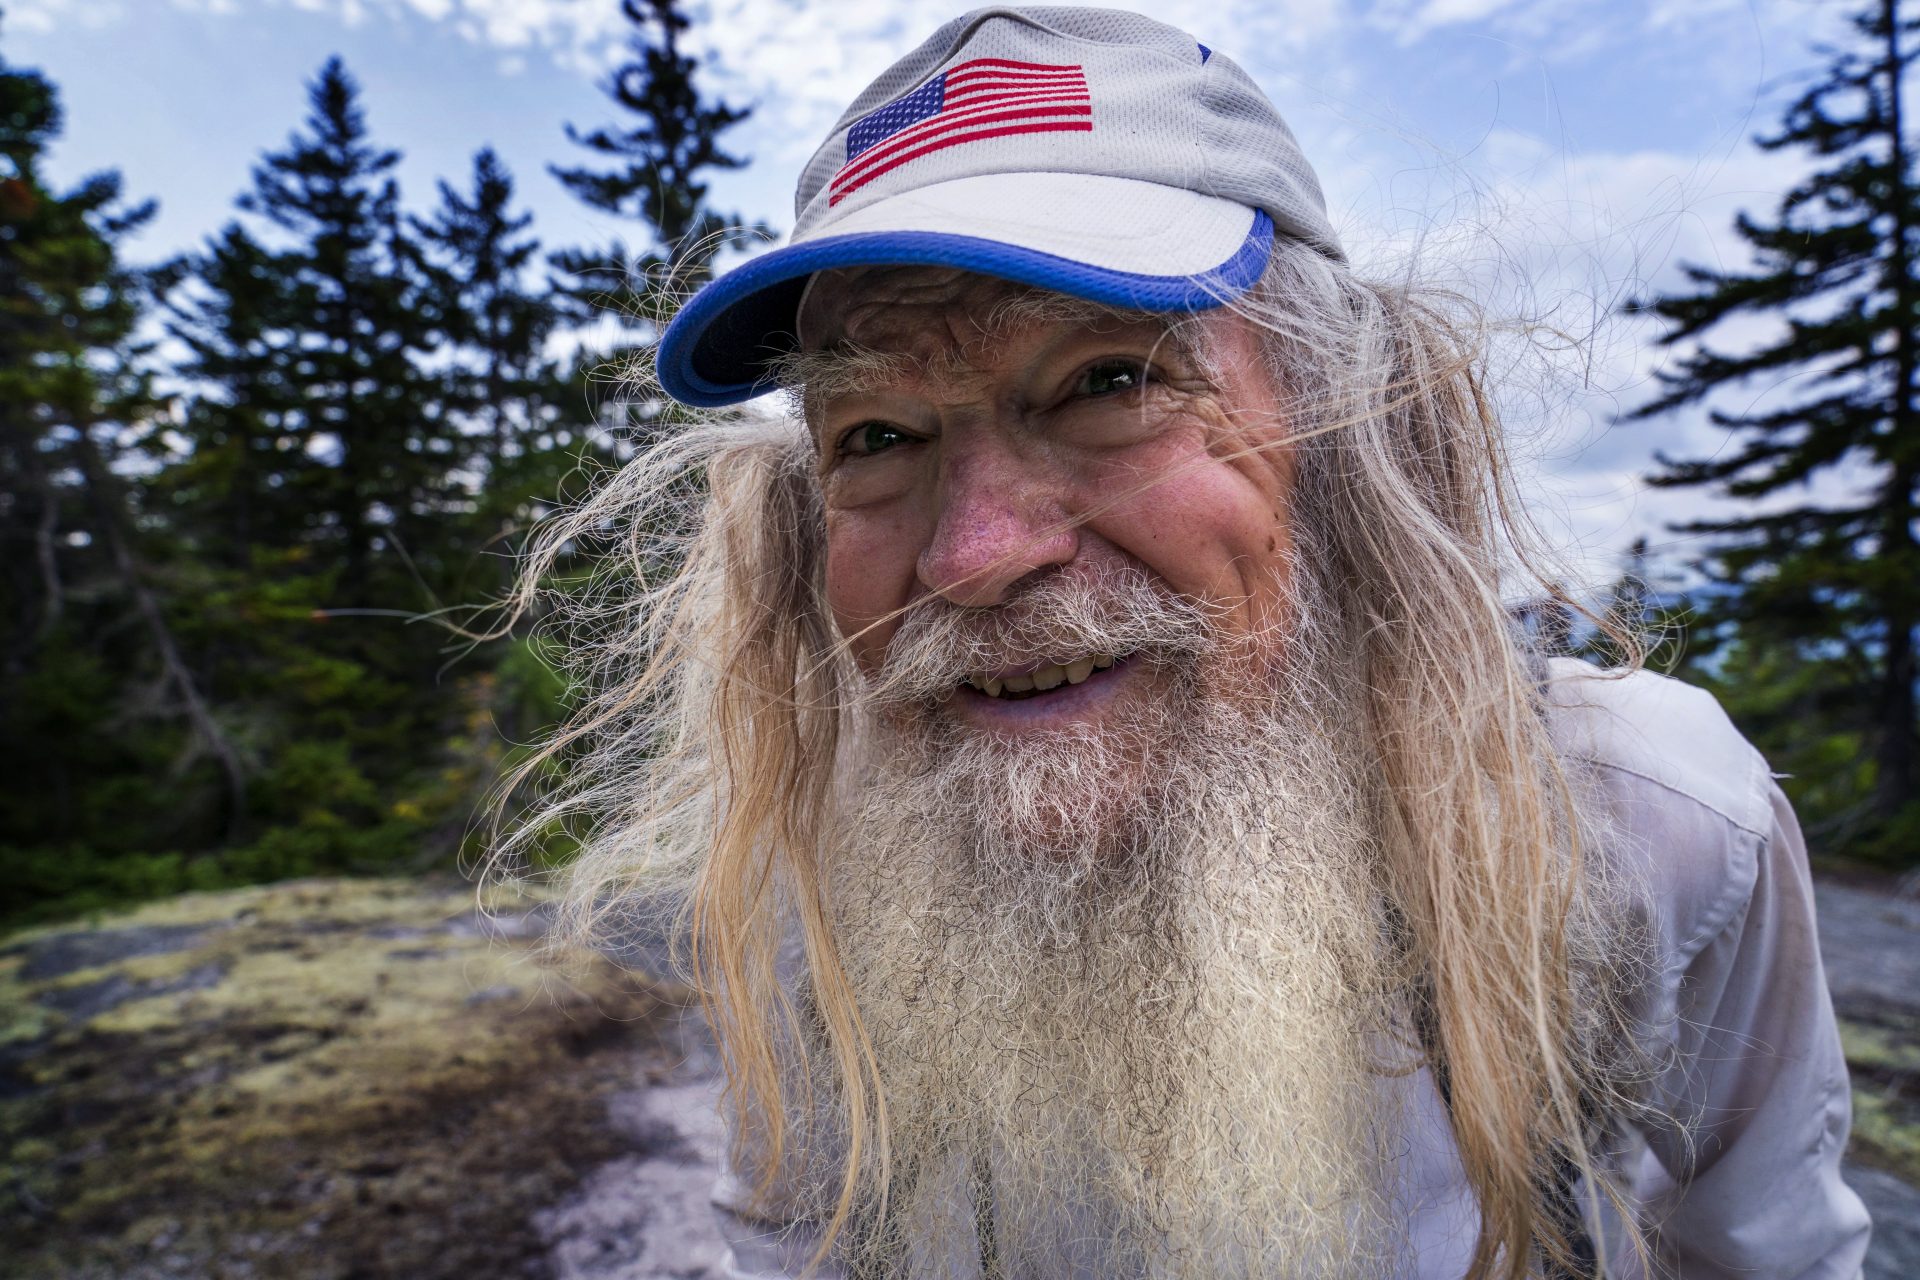 M.J. Eberhart, 83, arrives on the summit of Mount Hayes on the Appalachian Trail, Sunday, Sept. 12, 2021, in Gorham, New Hampshire.